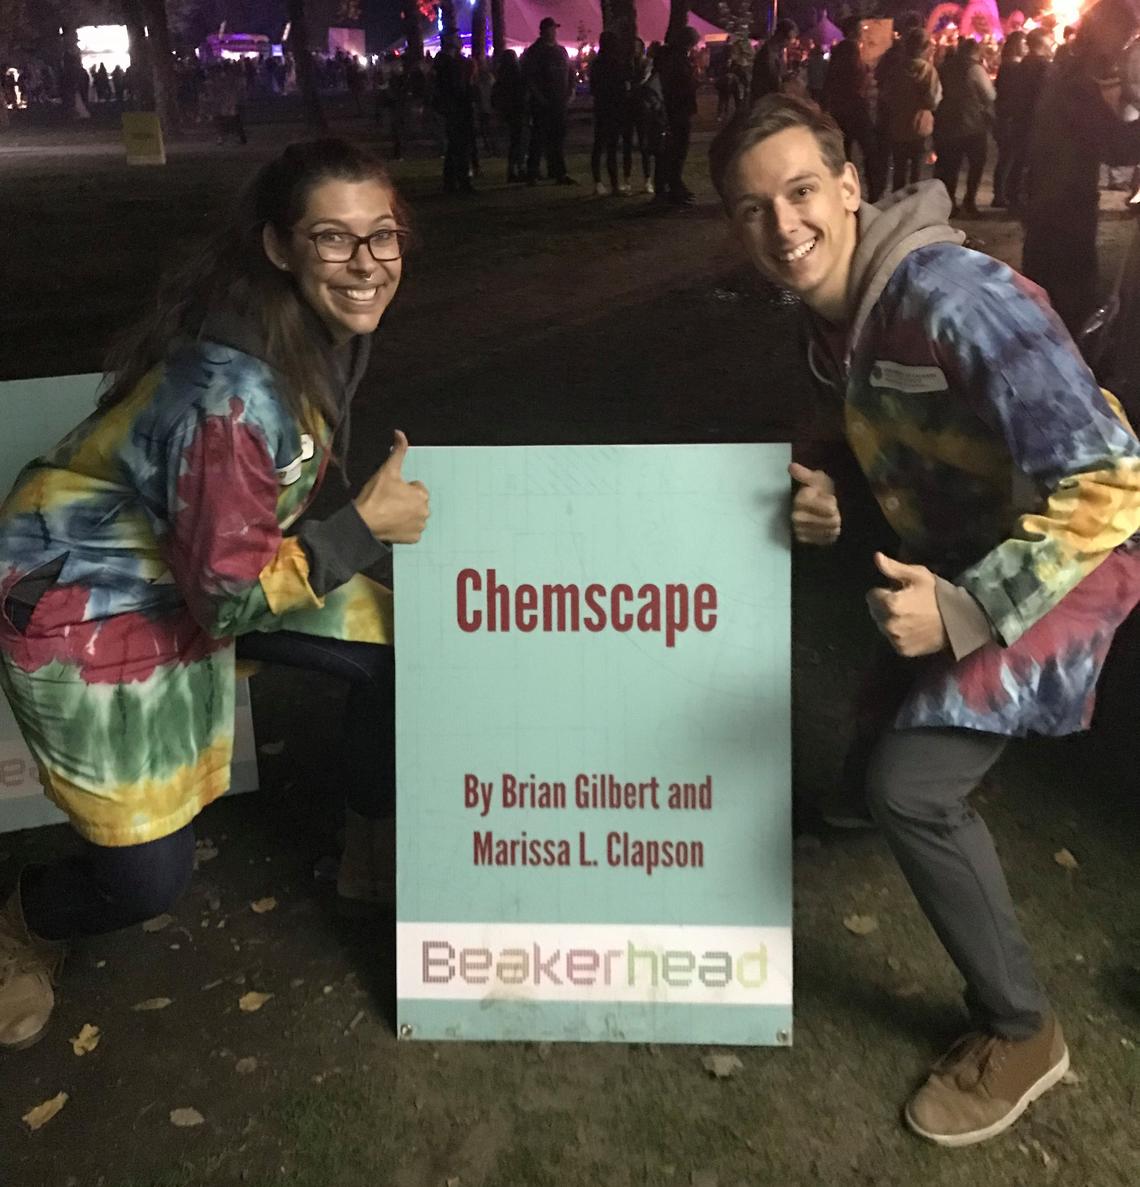 Marissa Clapson, ChemEscape founder and CEO, and Brian Gilbert at ChemEscape's debut at Beakerhead in 2018.